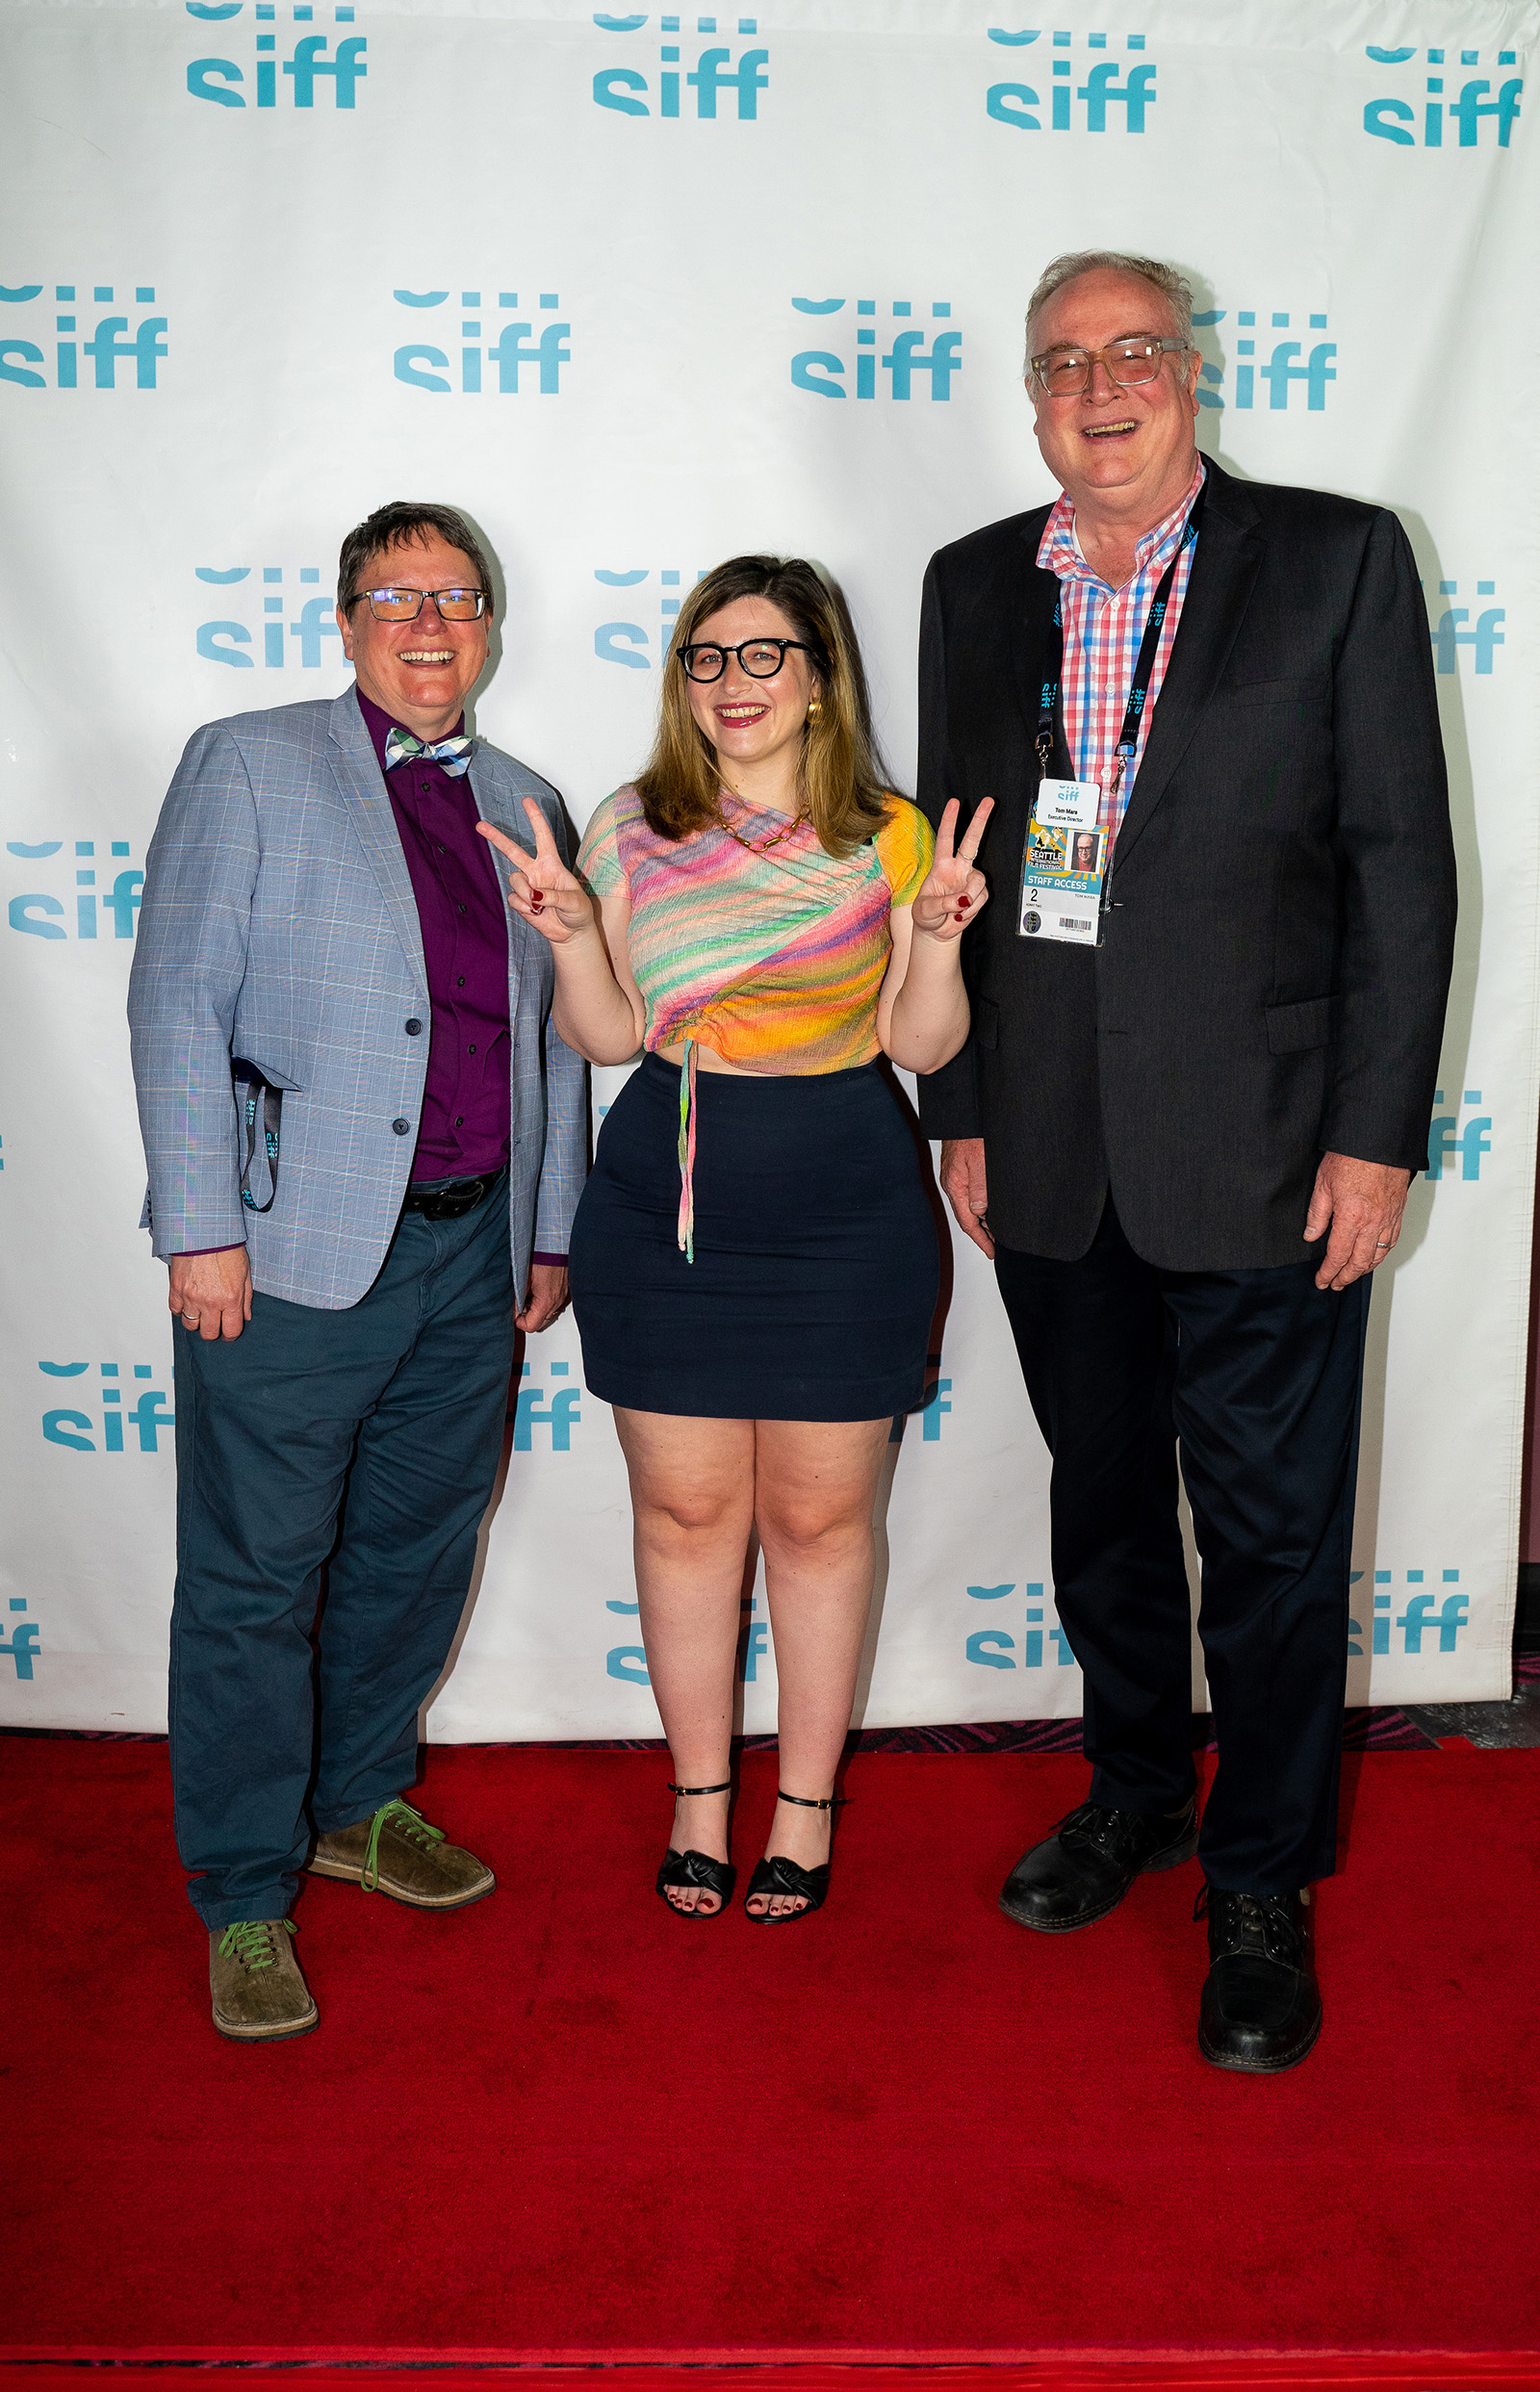 SIFF's Beth Barrett and Tom Mara pose with director, Chandler Levack, on the red carpet at Closing Night, which featured Levack's film I Like Movies